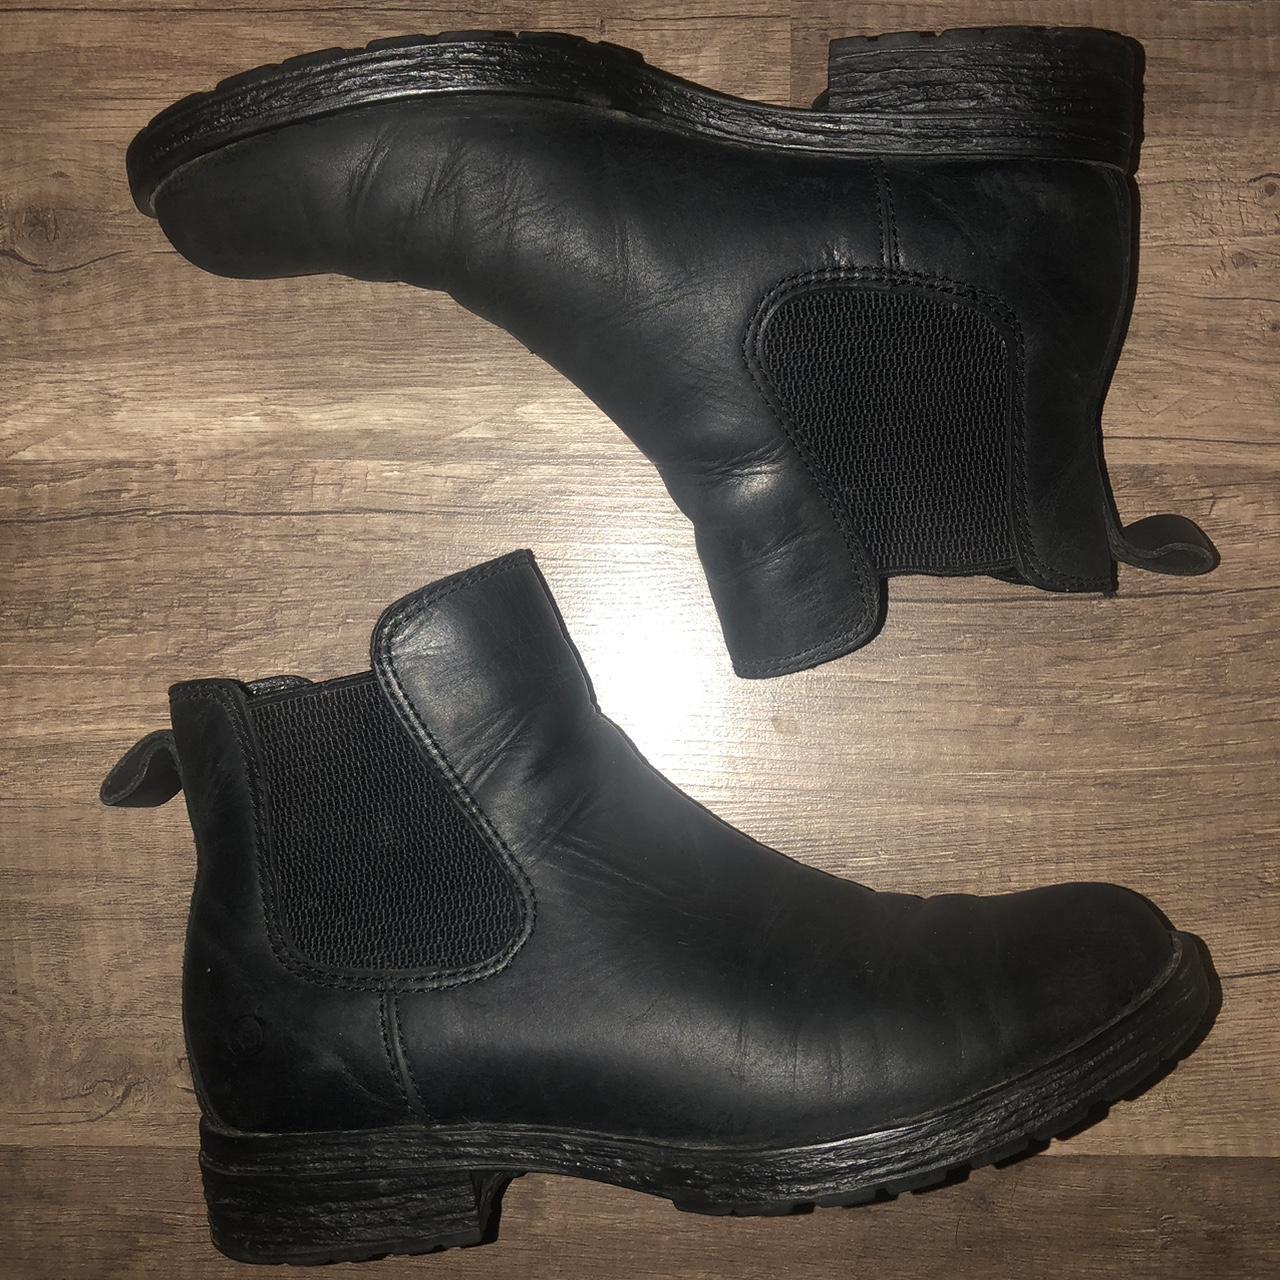 Born women’s Cove leather ankle boot 7.5 Everyday in... - Depop